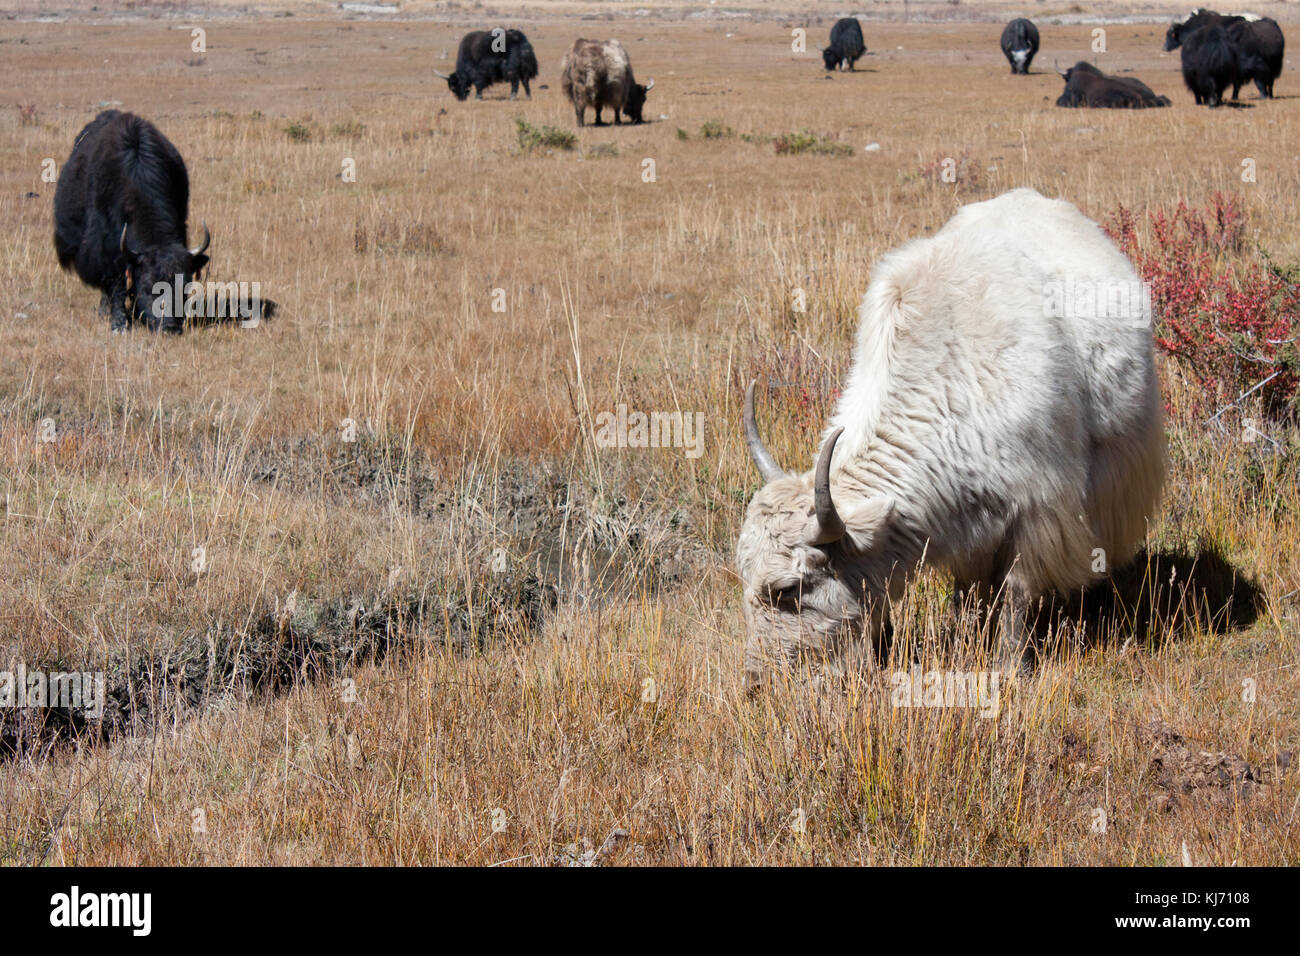 Yak grazing in the Marsyangdi valley on himalayan mountain plateou at 3500 m, close to Manang and Bhraka, along the Annapurna circuit, Nepal. Stock Photo